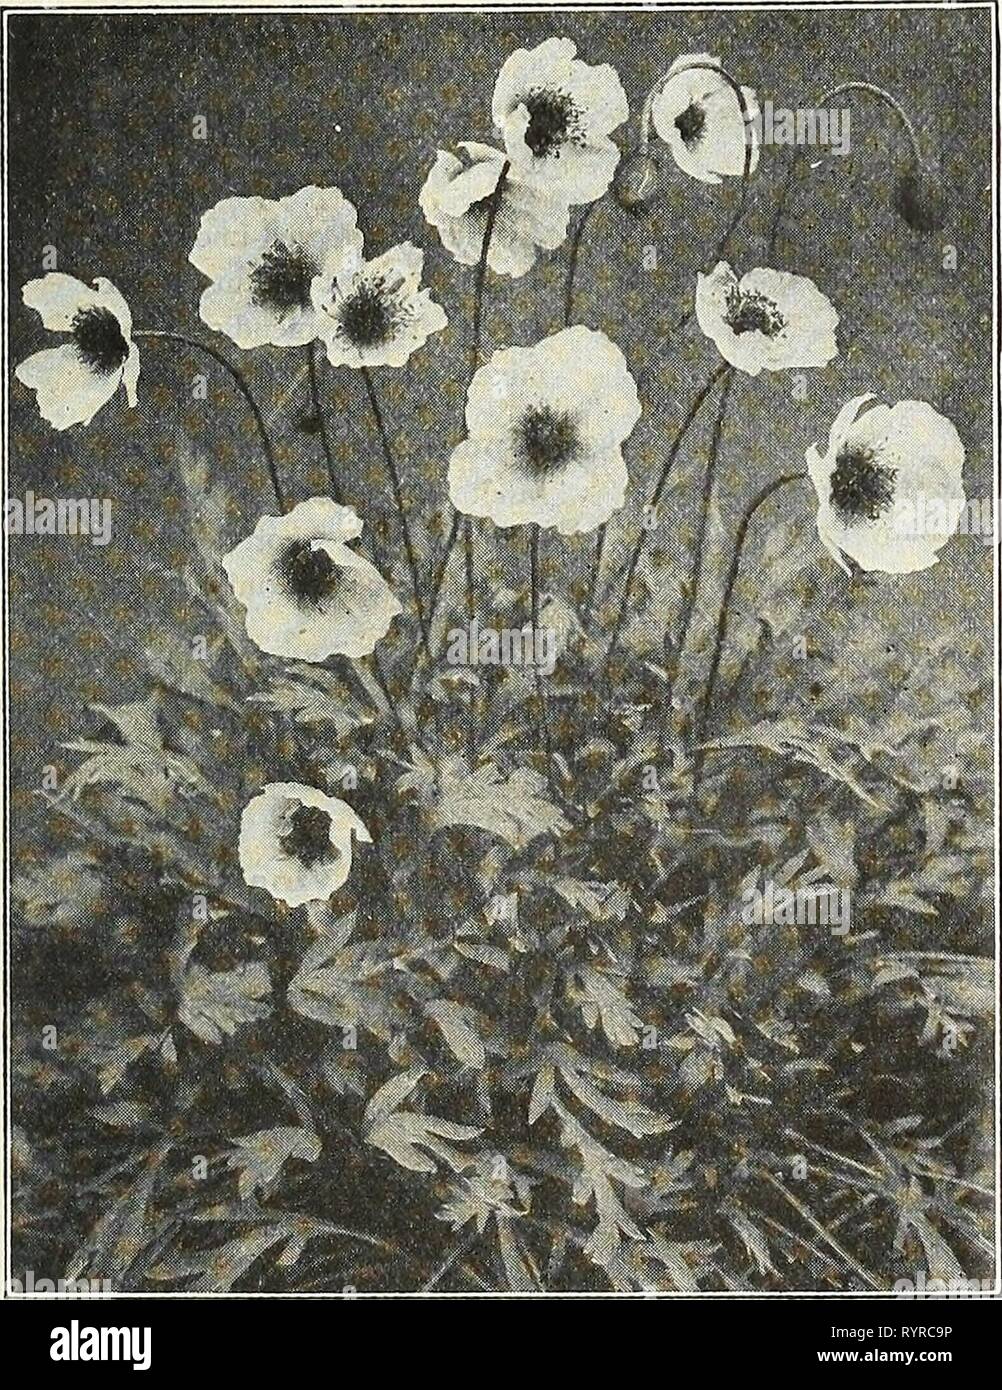 Dreer's midsummer list 1927 (1927) Dreer's midsummer list 1927 . dreersmidsummerl1927henr Year: 1927  HENRY A. DREER, PHILADELPHIA—FLOWER SEEDS 15 Platycodon (Balloon Flower, or Japanese Bellfiower) One of the best hardy perennials, producing very showy flowers during the whole season. They form large clumps and are excellent for planting in permanent borders or among shrubbery; easily raised from seed. PER PKT. 3663 Grandiflorum. Large steel blue flowers. | oz., 40 cts $0 10 3664 — Album. Pure white variety. J oz., 40 cts. 10 3662 Mariesi. Large, open, bell-shaped flowers of a rich violet-blu Stock Photo